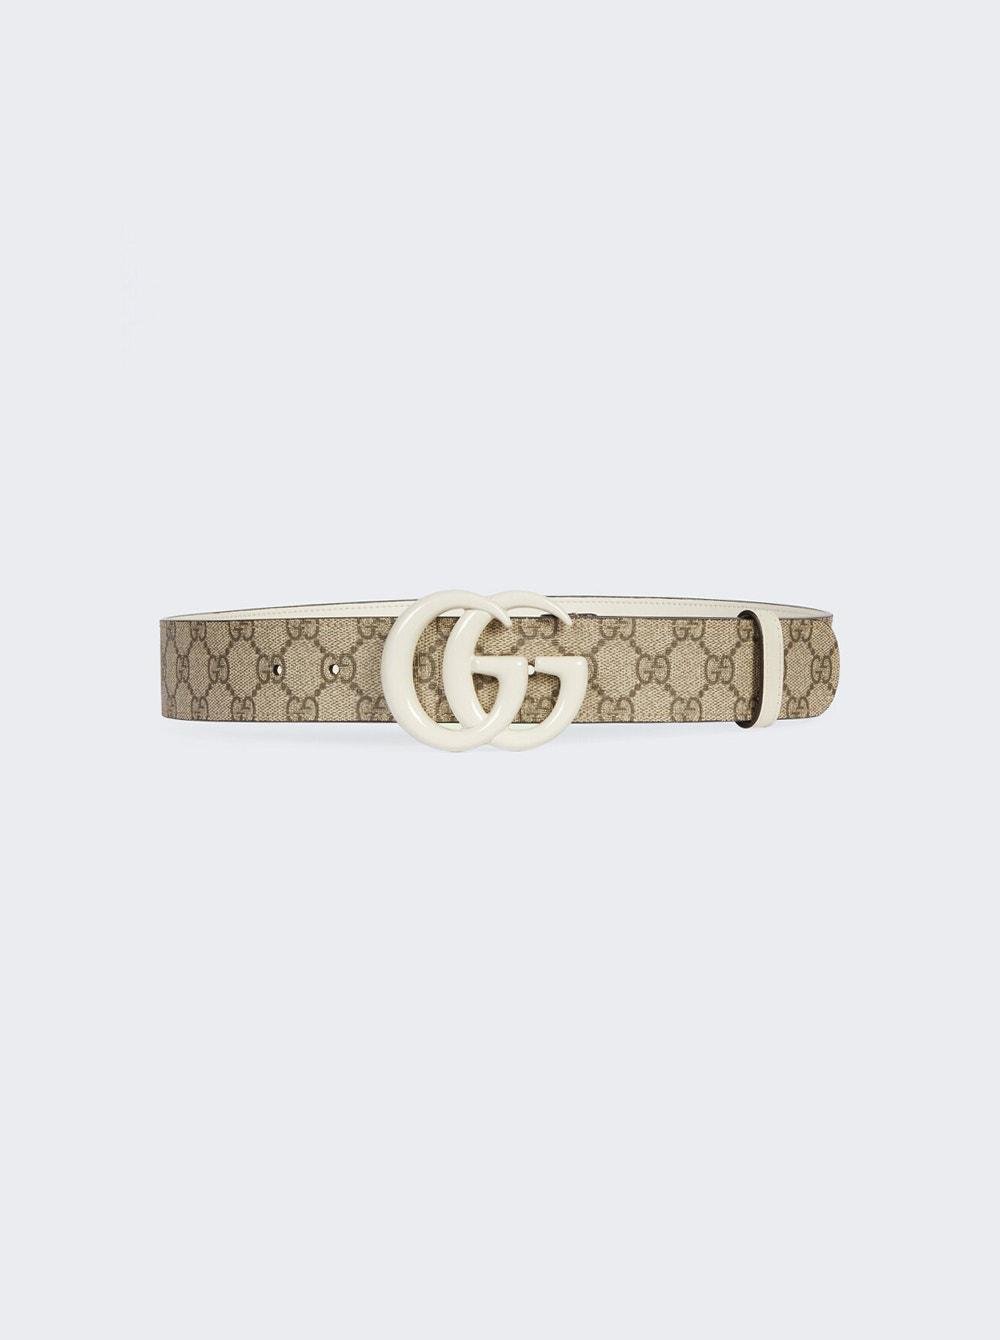 GG Marmont Wide Belt Beige and Ebony by GUCCI